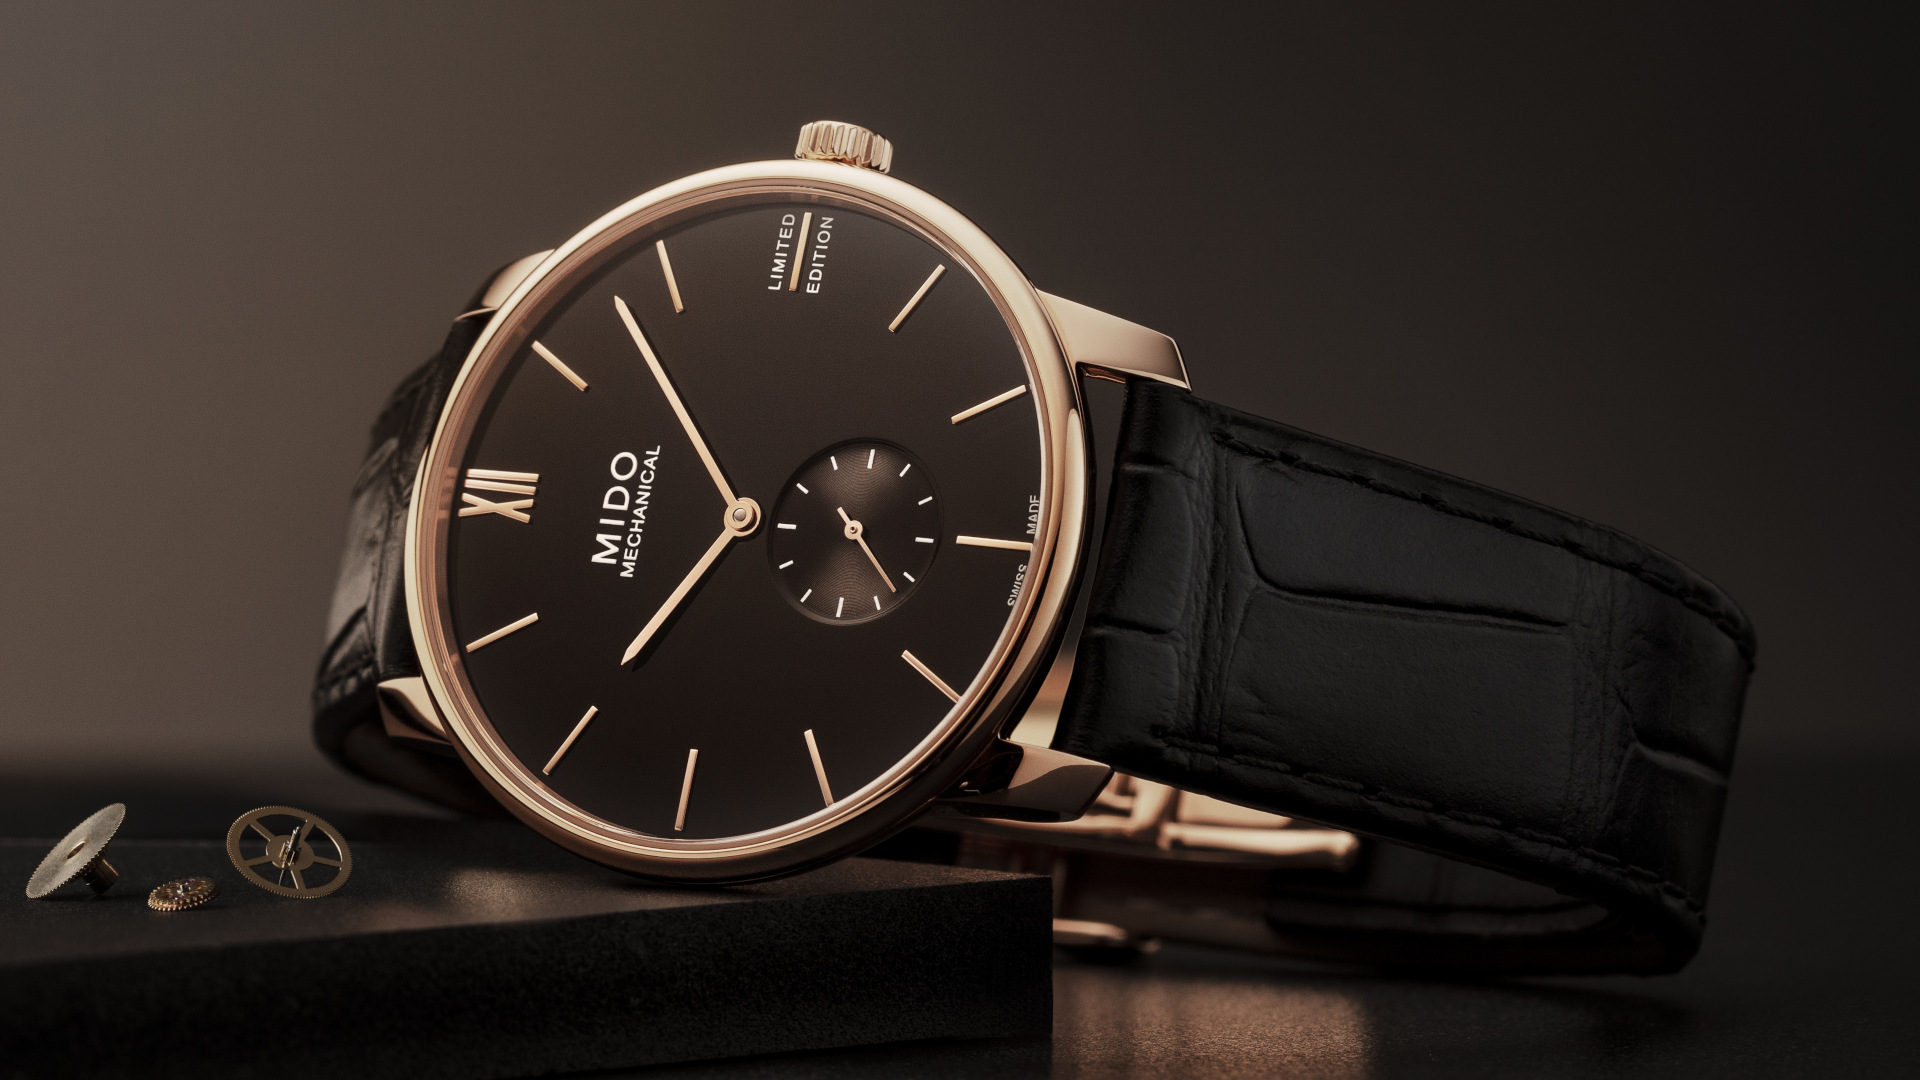 Mido Baroncelli Mechanical Limited Edition: A respectable dress watch at a respectable price